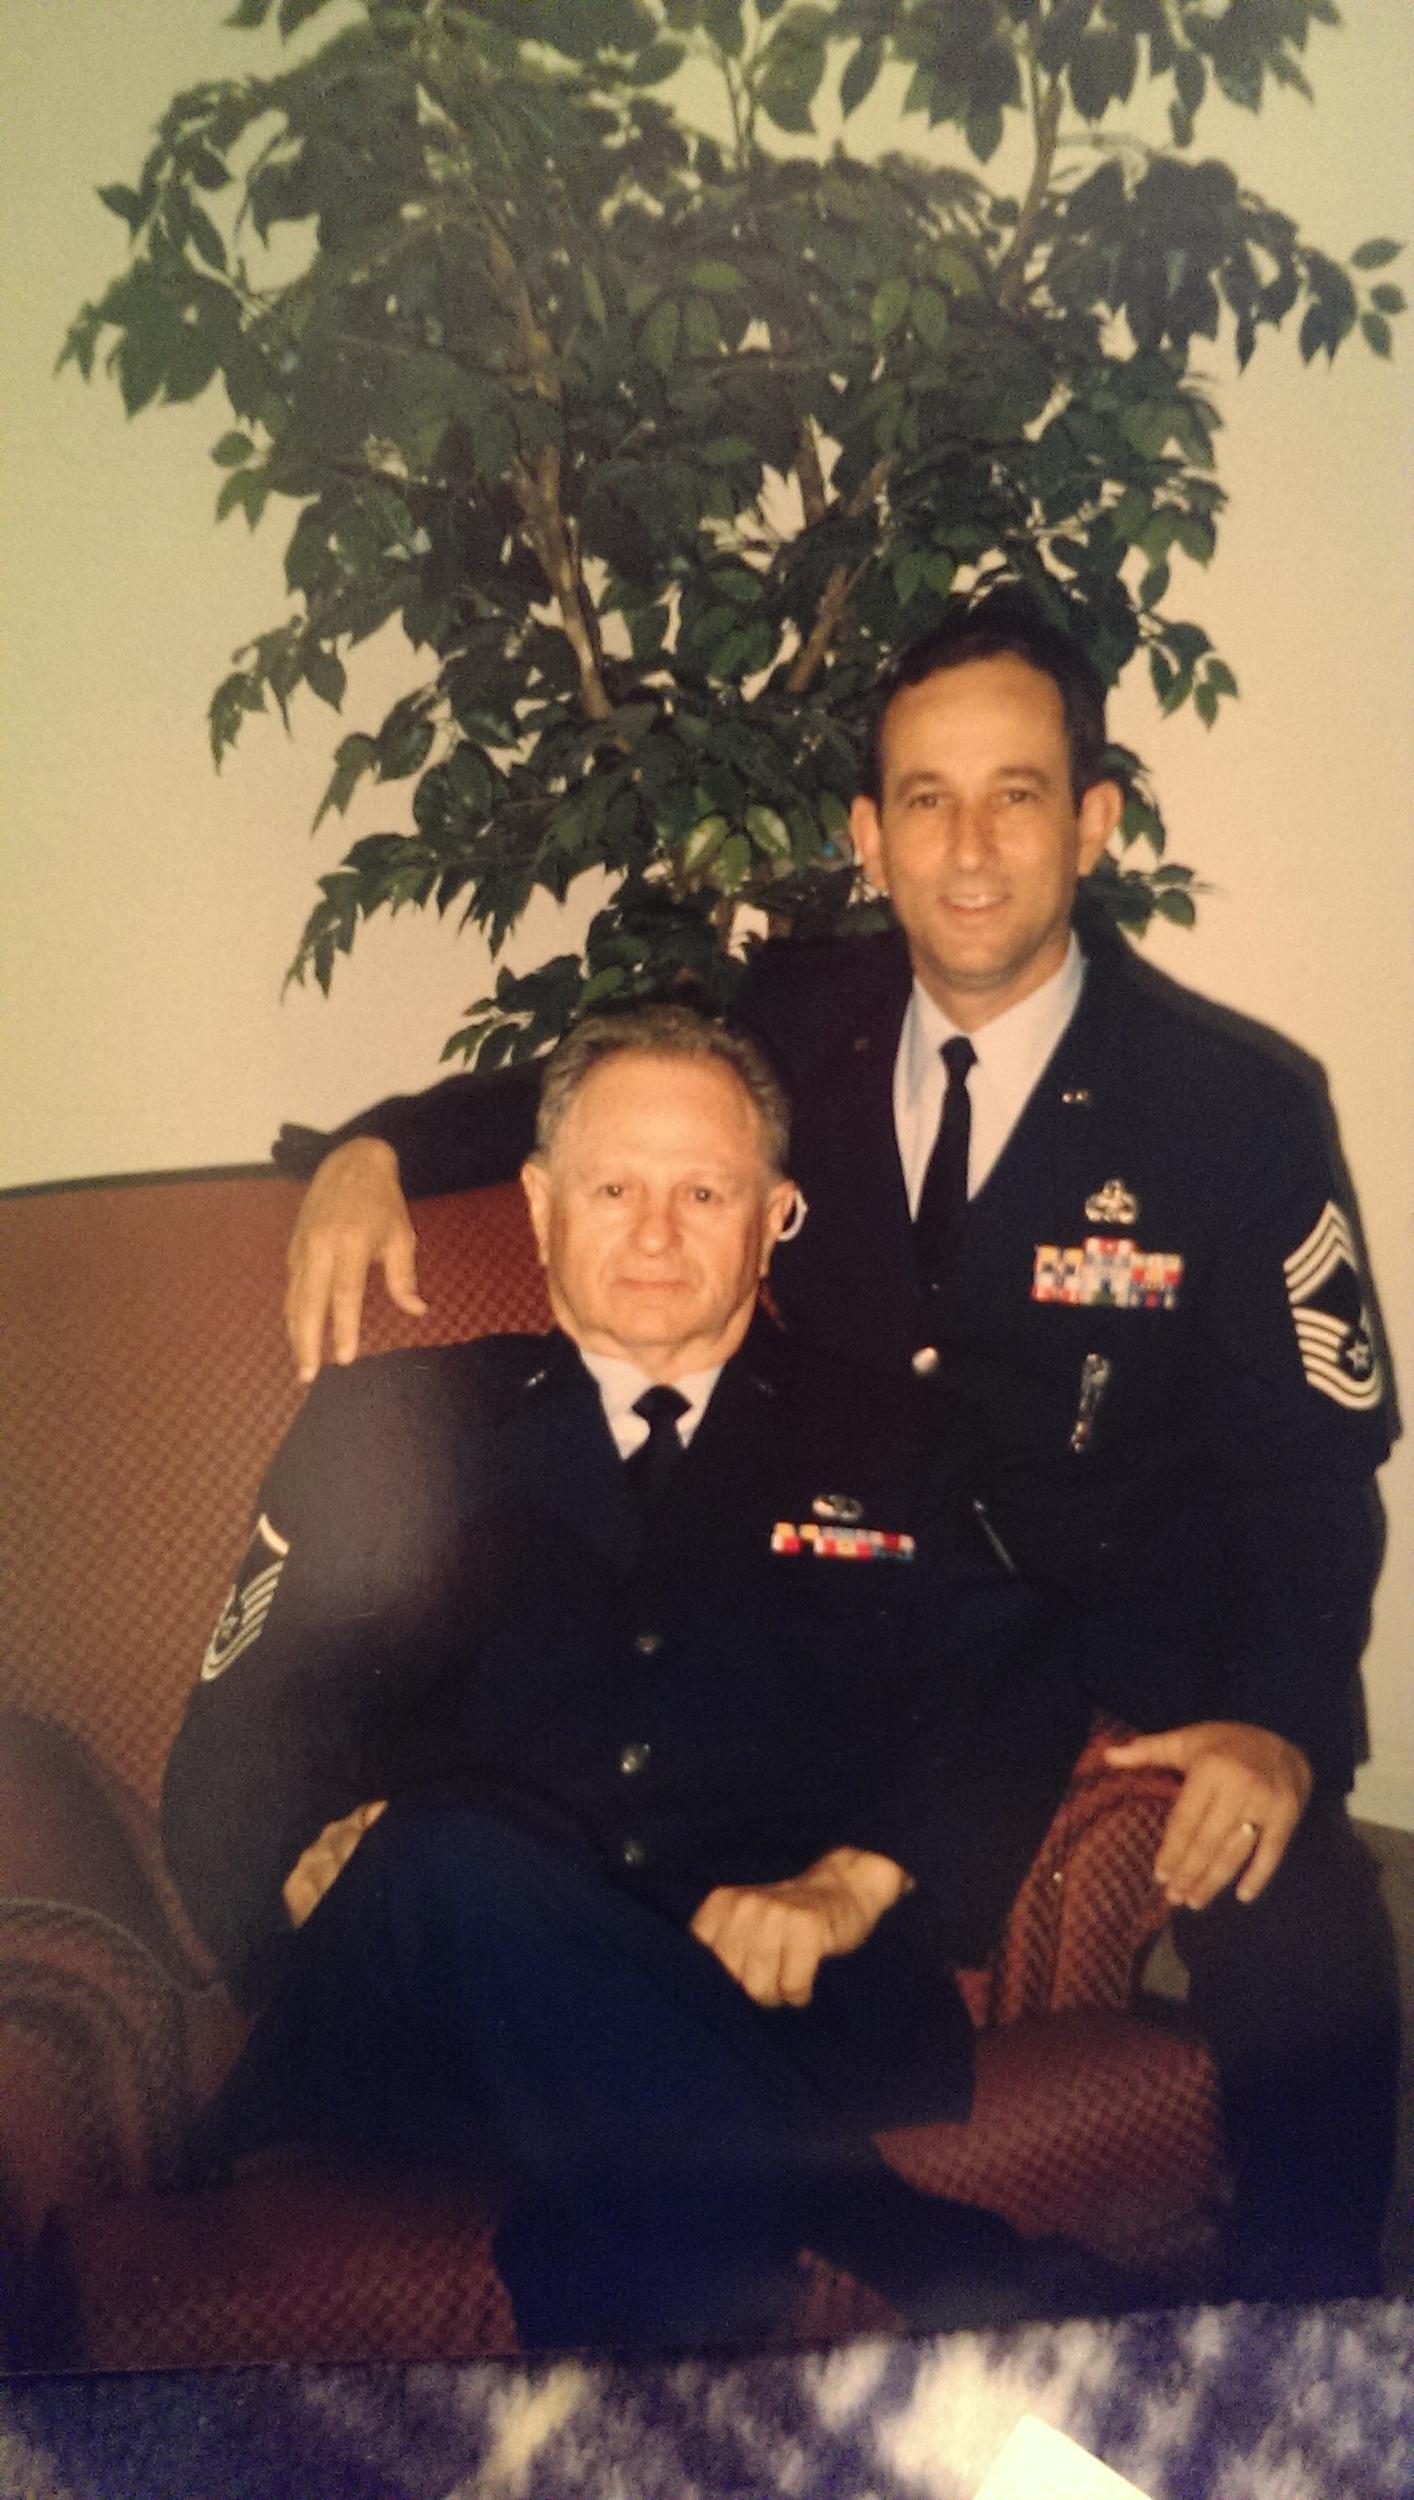 Uncles Charles, and Charles, Jr. Both with impressive military careers.